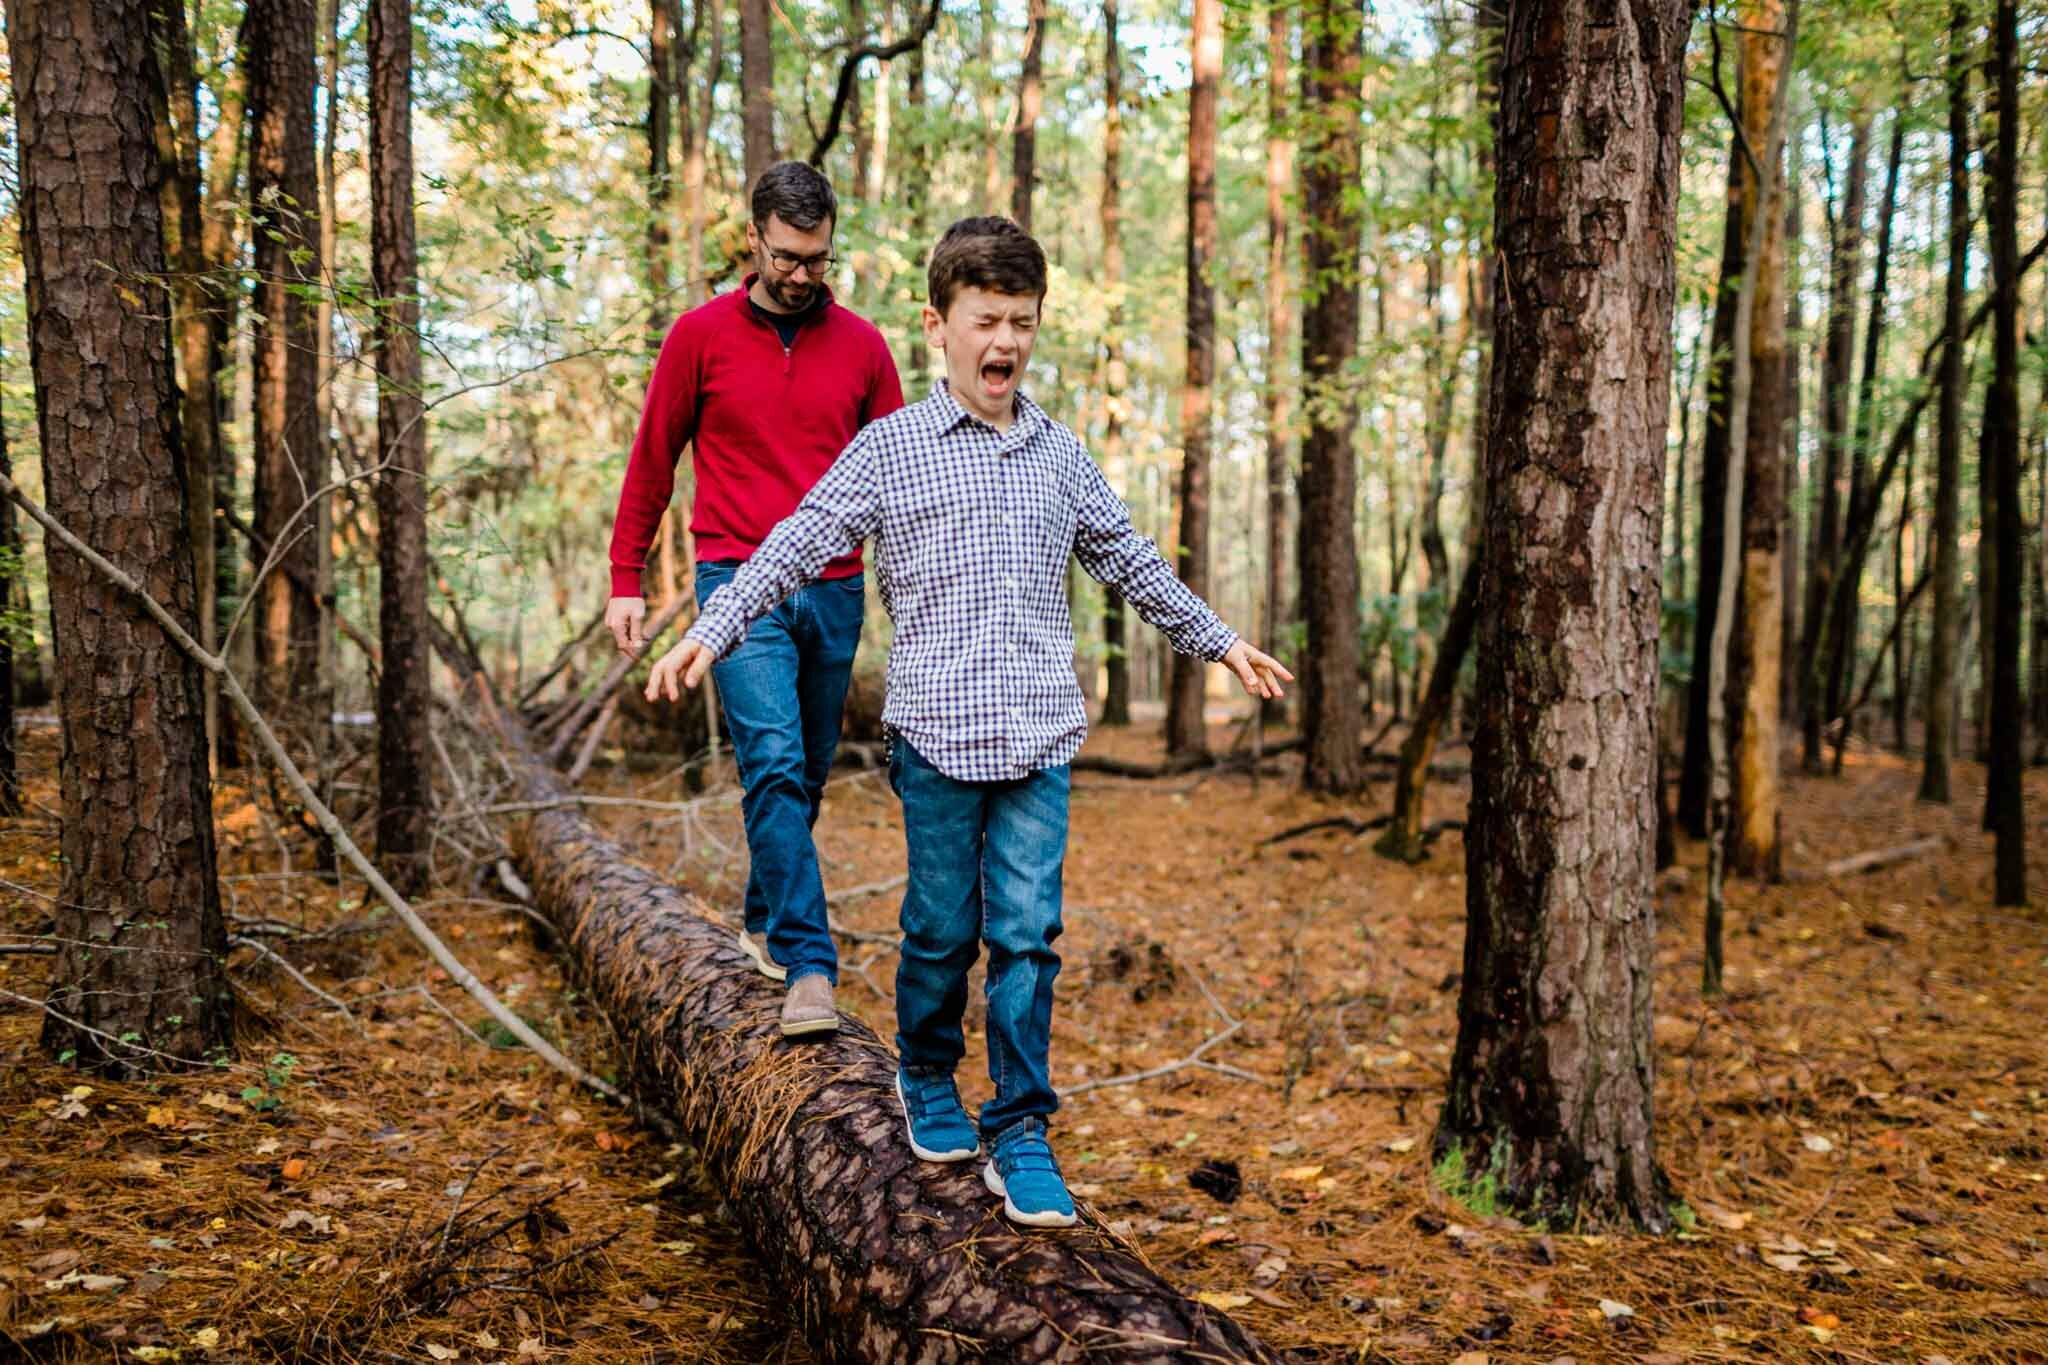 Raleigh Family Photographer | By G. Lin Photography | Umstead Park | Young boy walking on log